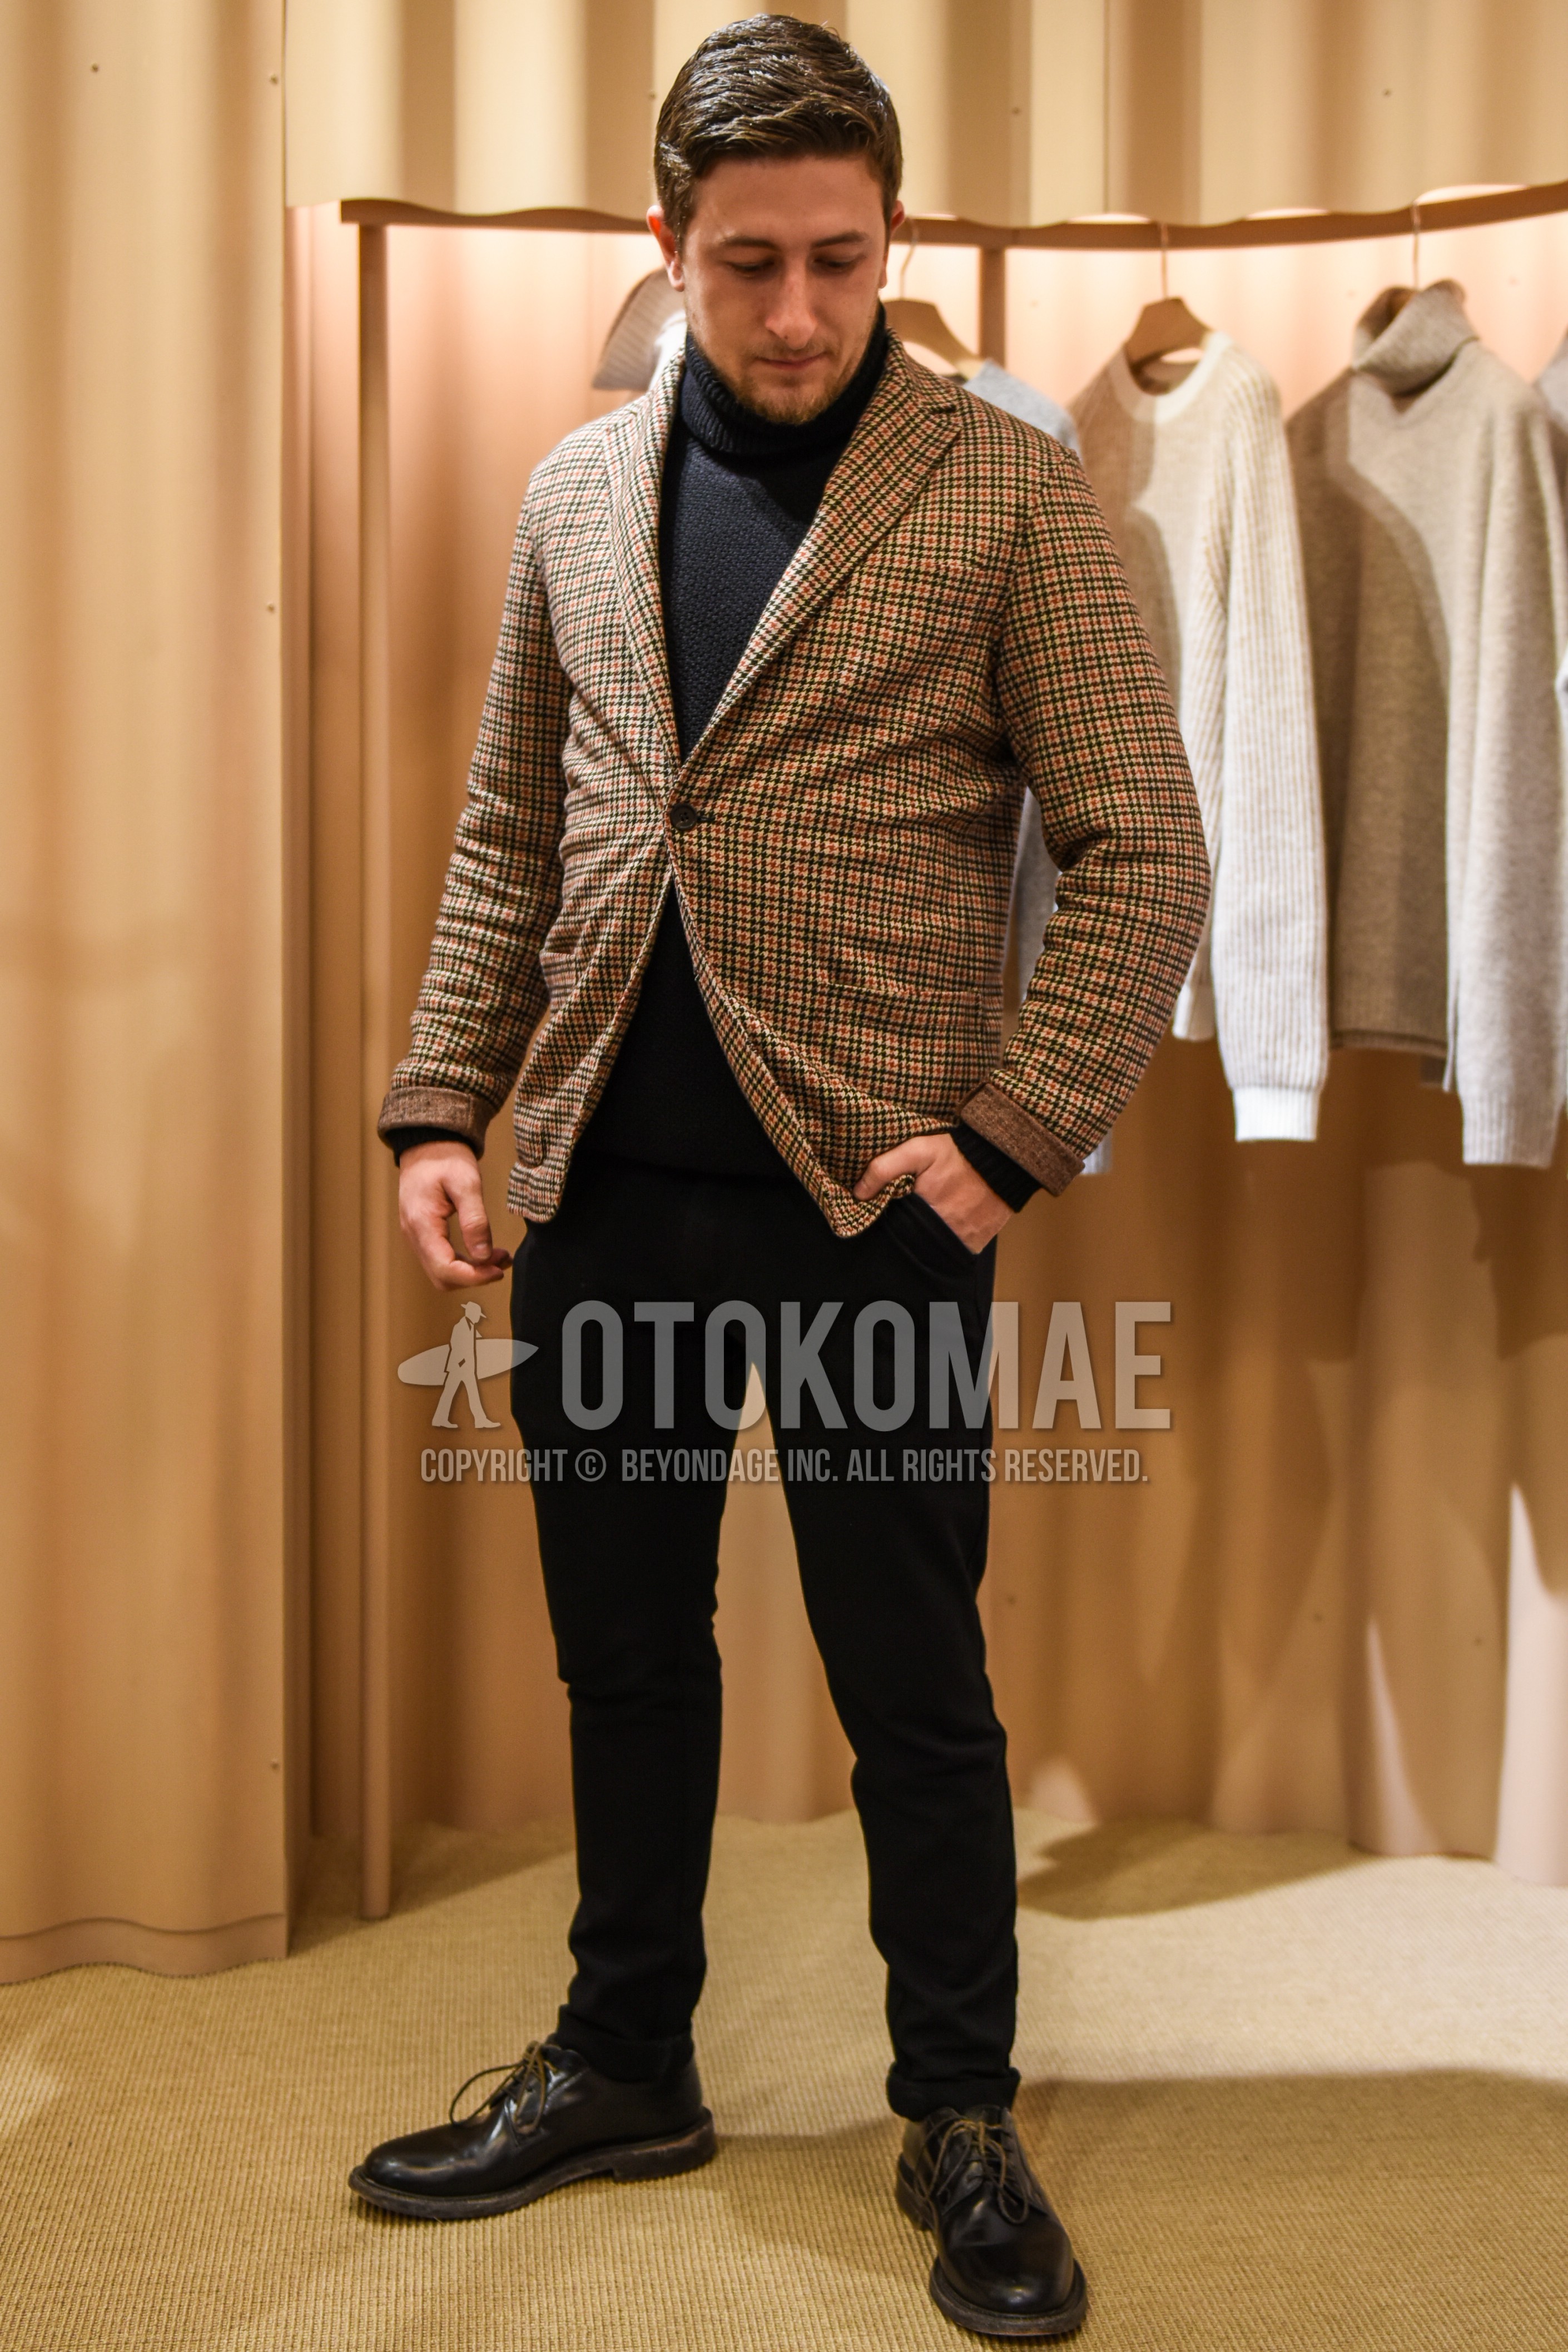 Men's spring autumn outfit with beige check tailored jacket, black plain turtleneck knit, black plain skinny pants, black plain slacks, brown plain toe leather shoes.